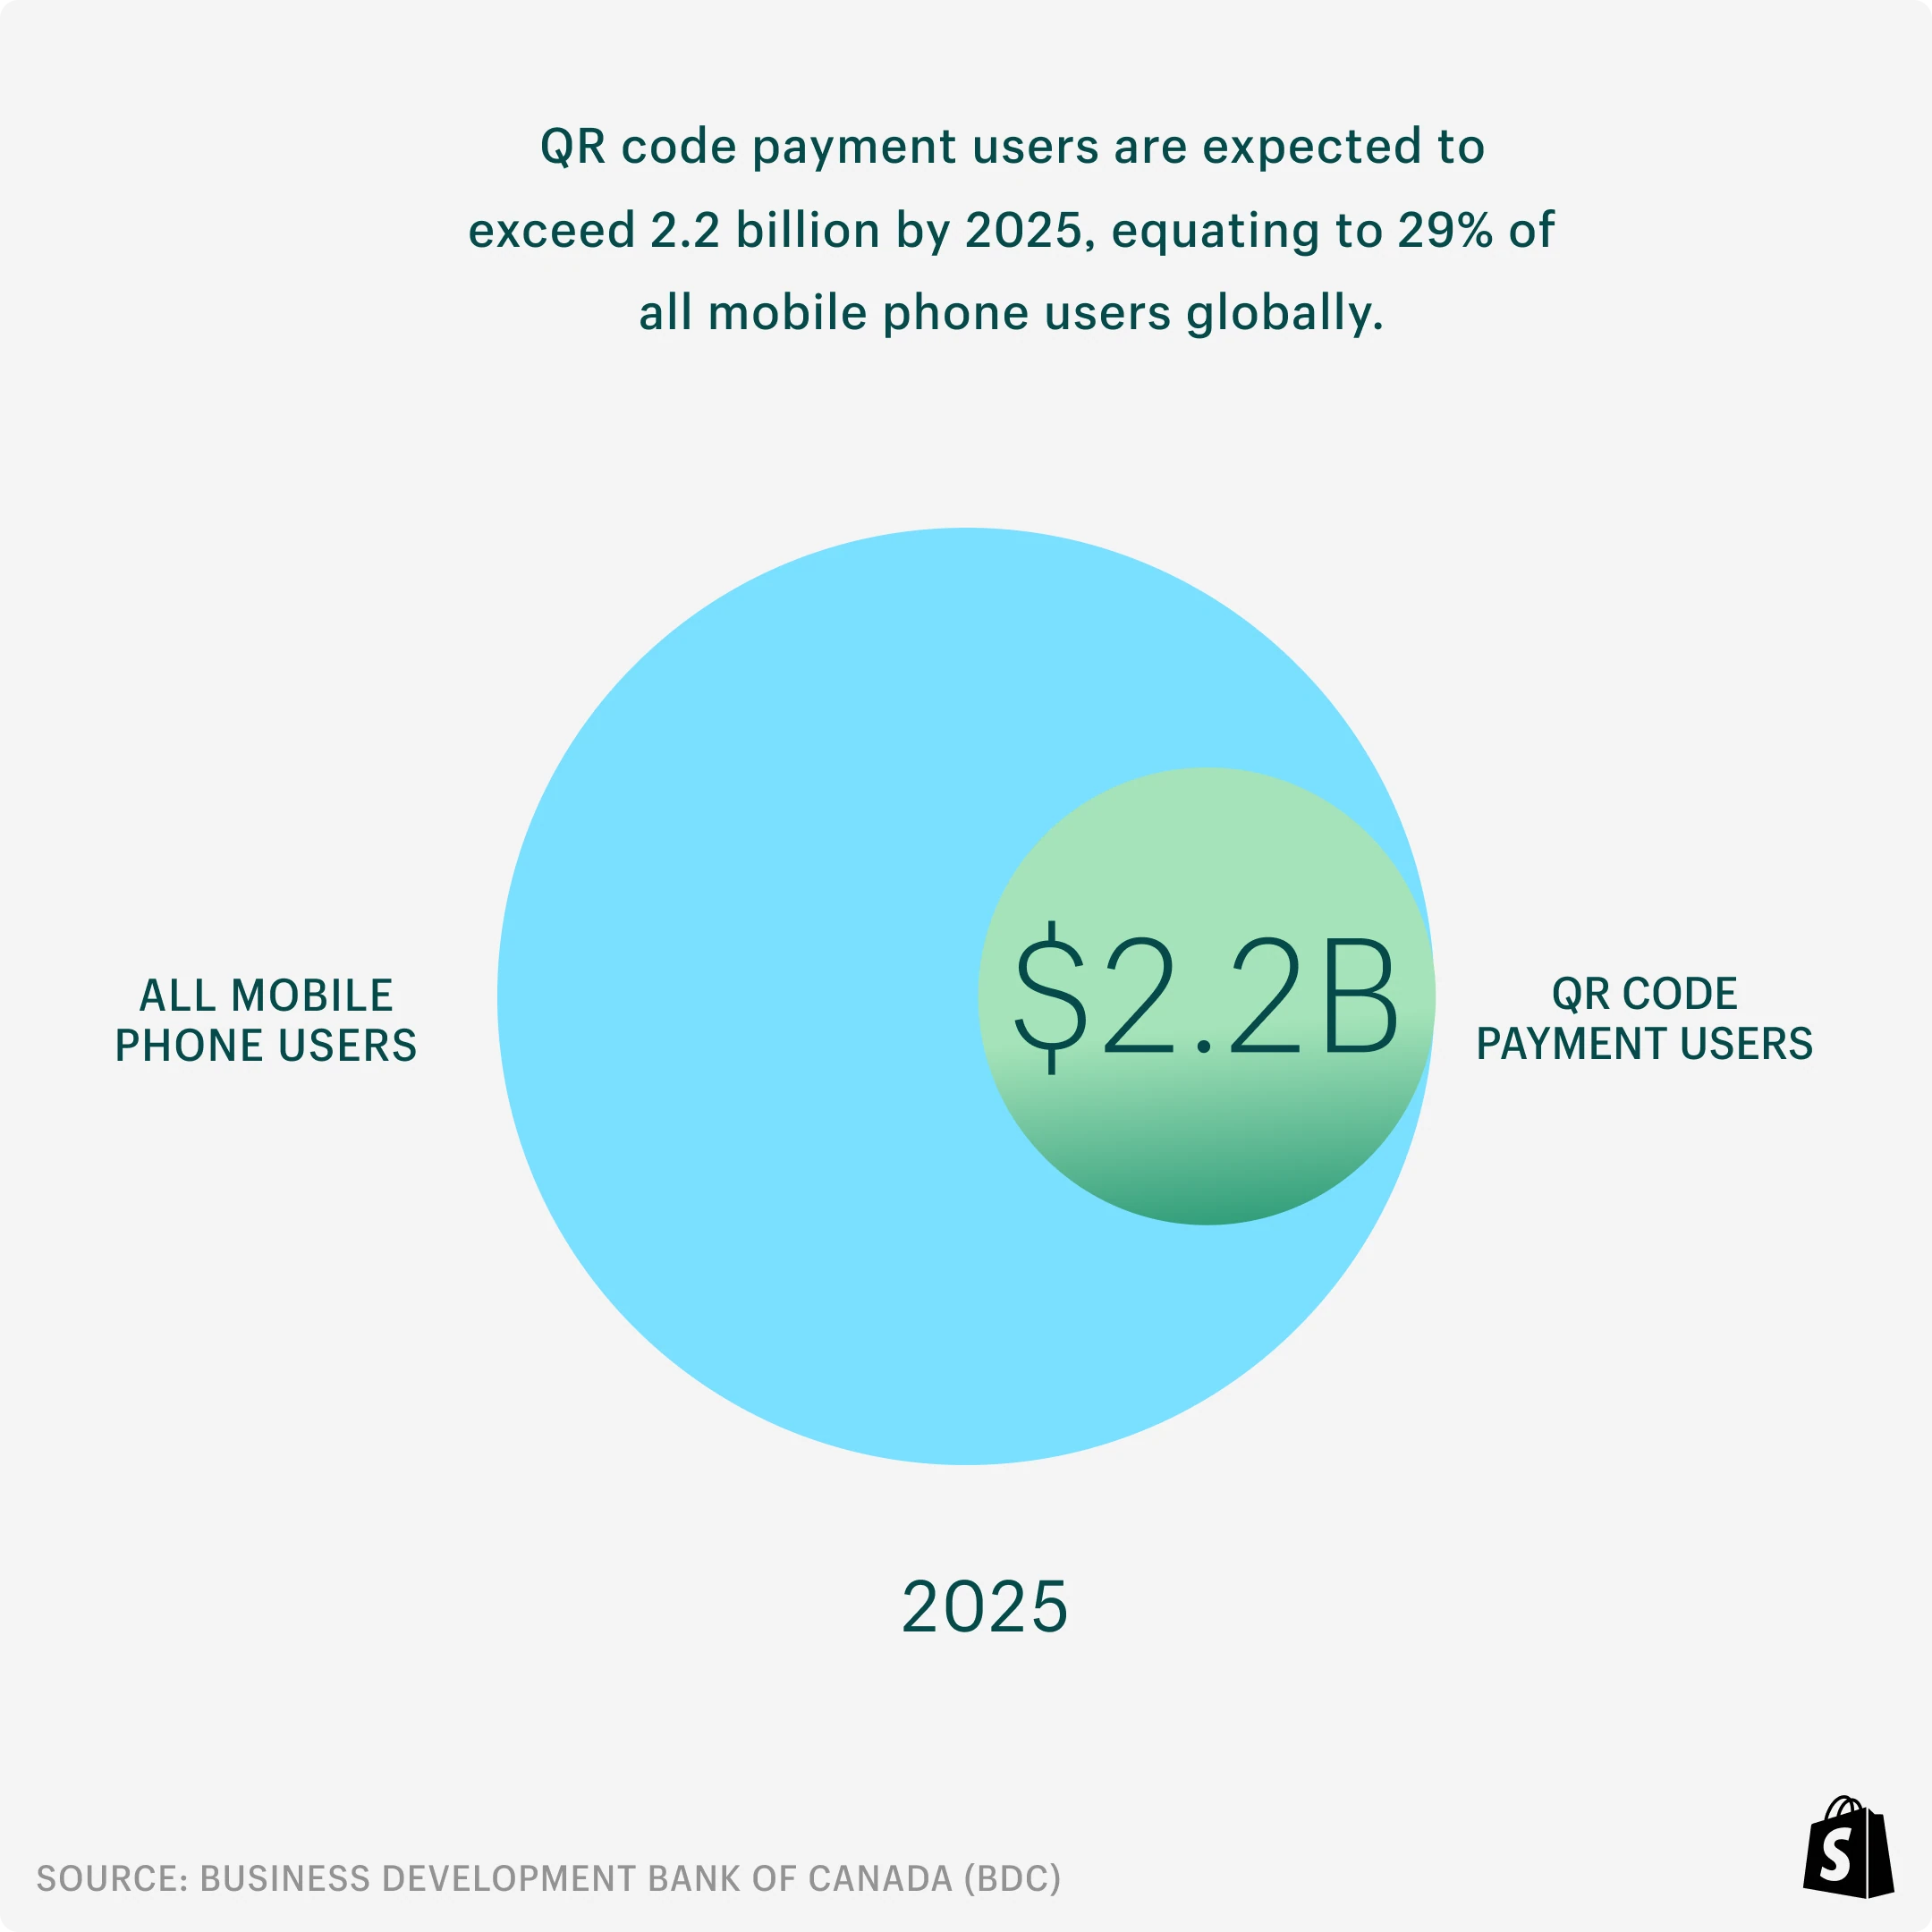 Graph showing QR code payment users are expected to exceed 2.2 billion by 2025, equating to 29% of all mobile phone users globally.